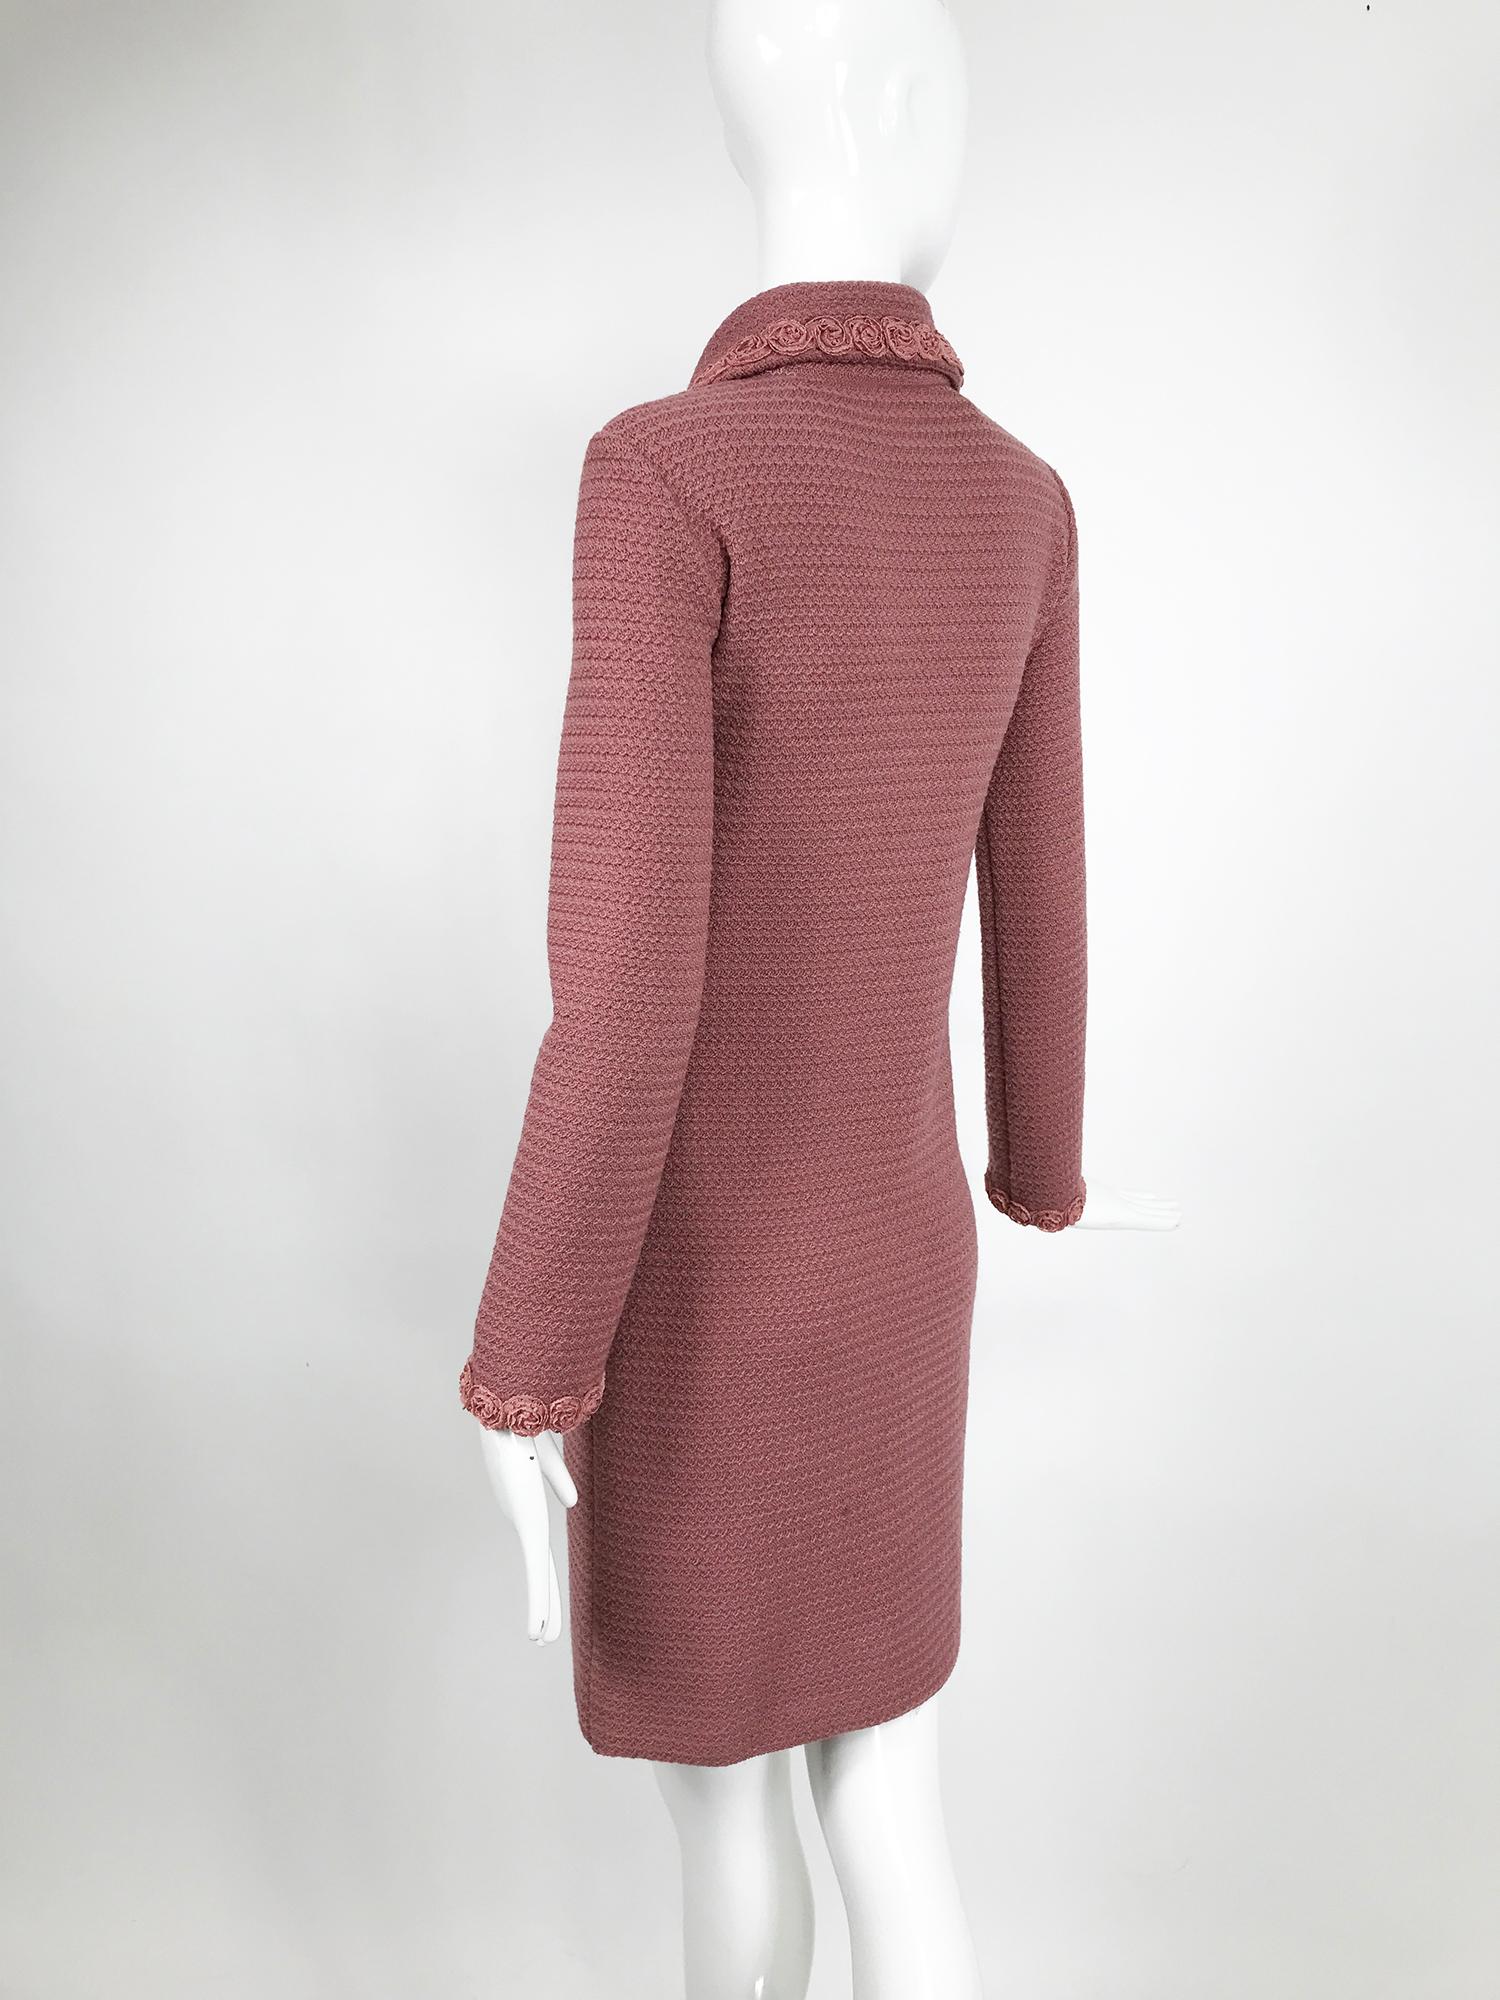 Moschino Pink Wool Knit Coat with Rosette Lace Trims 2